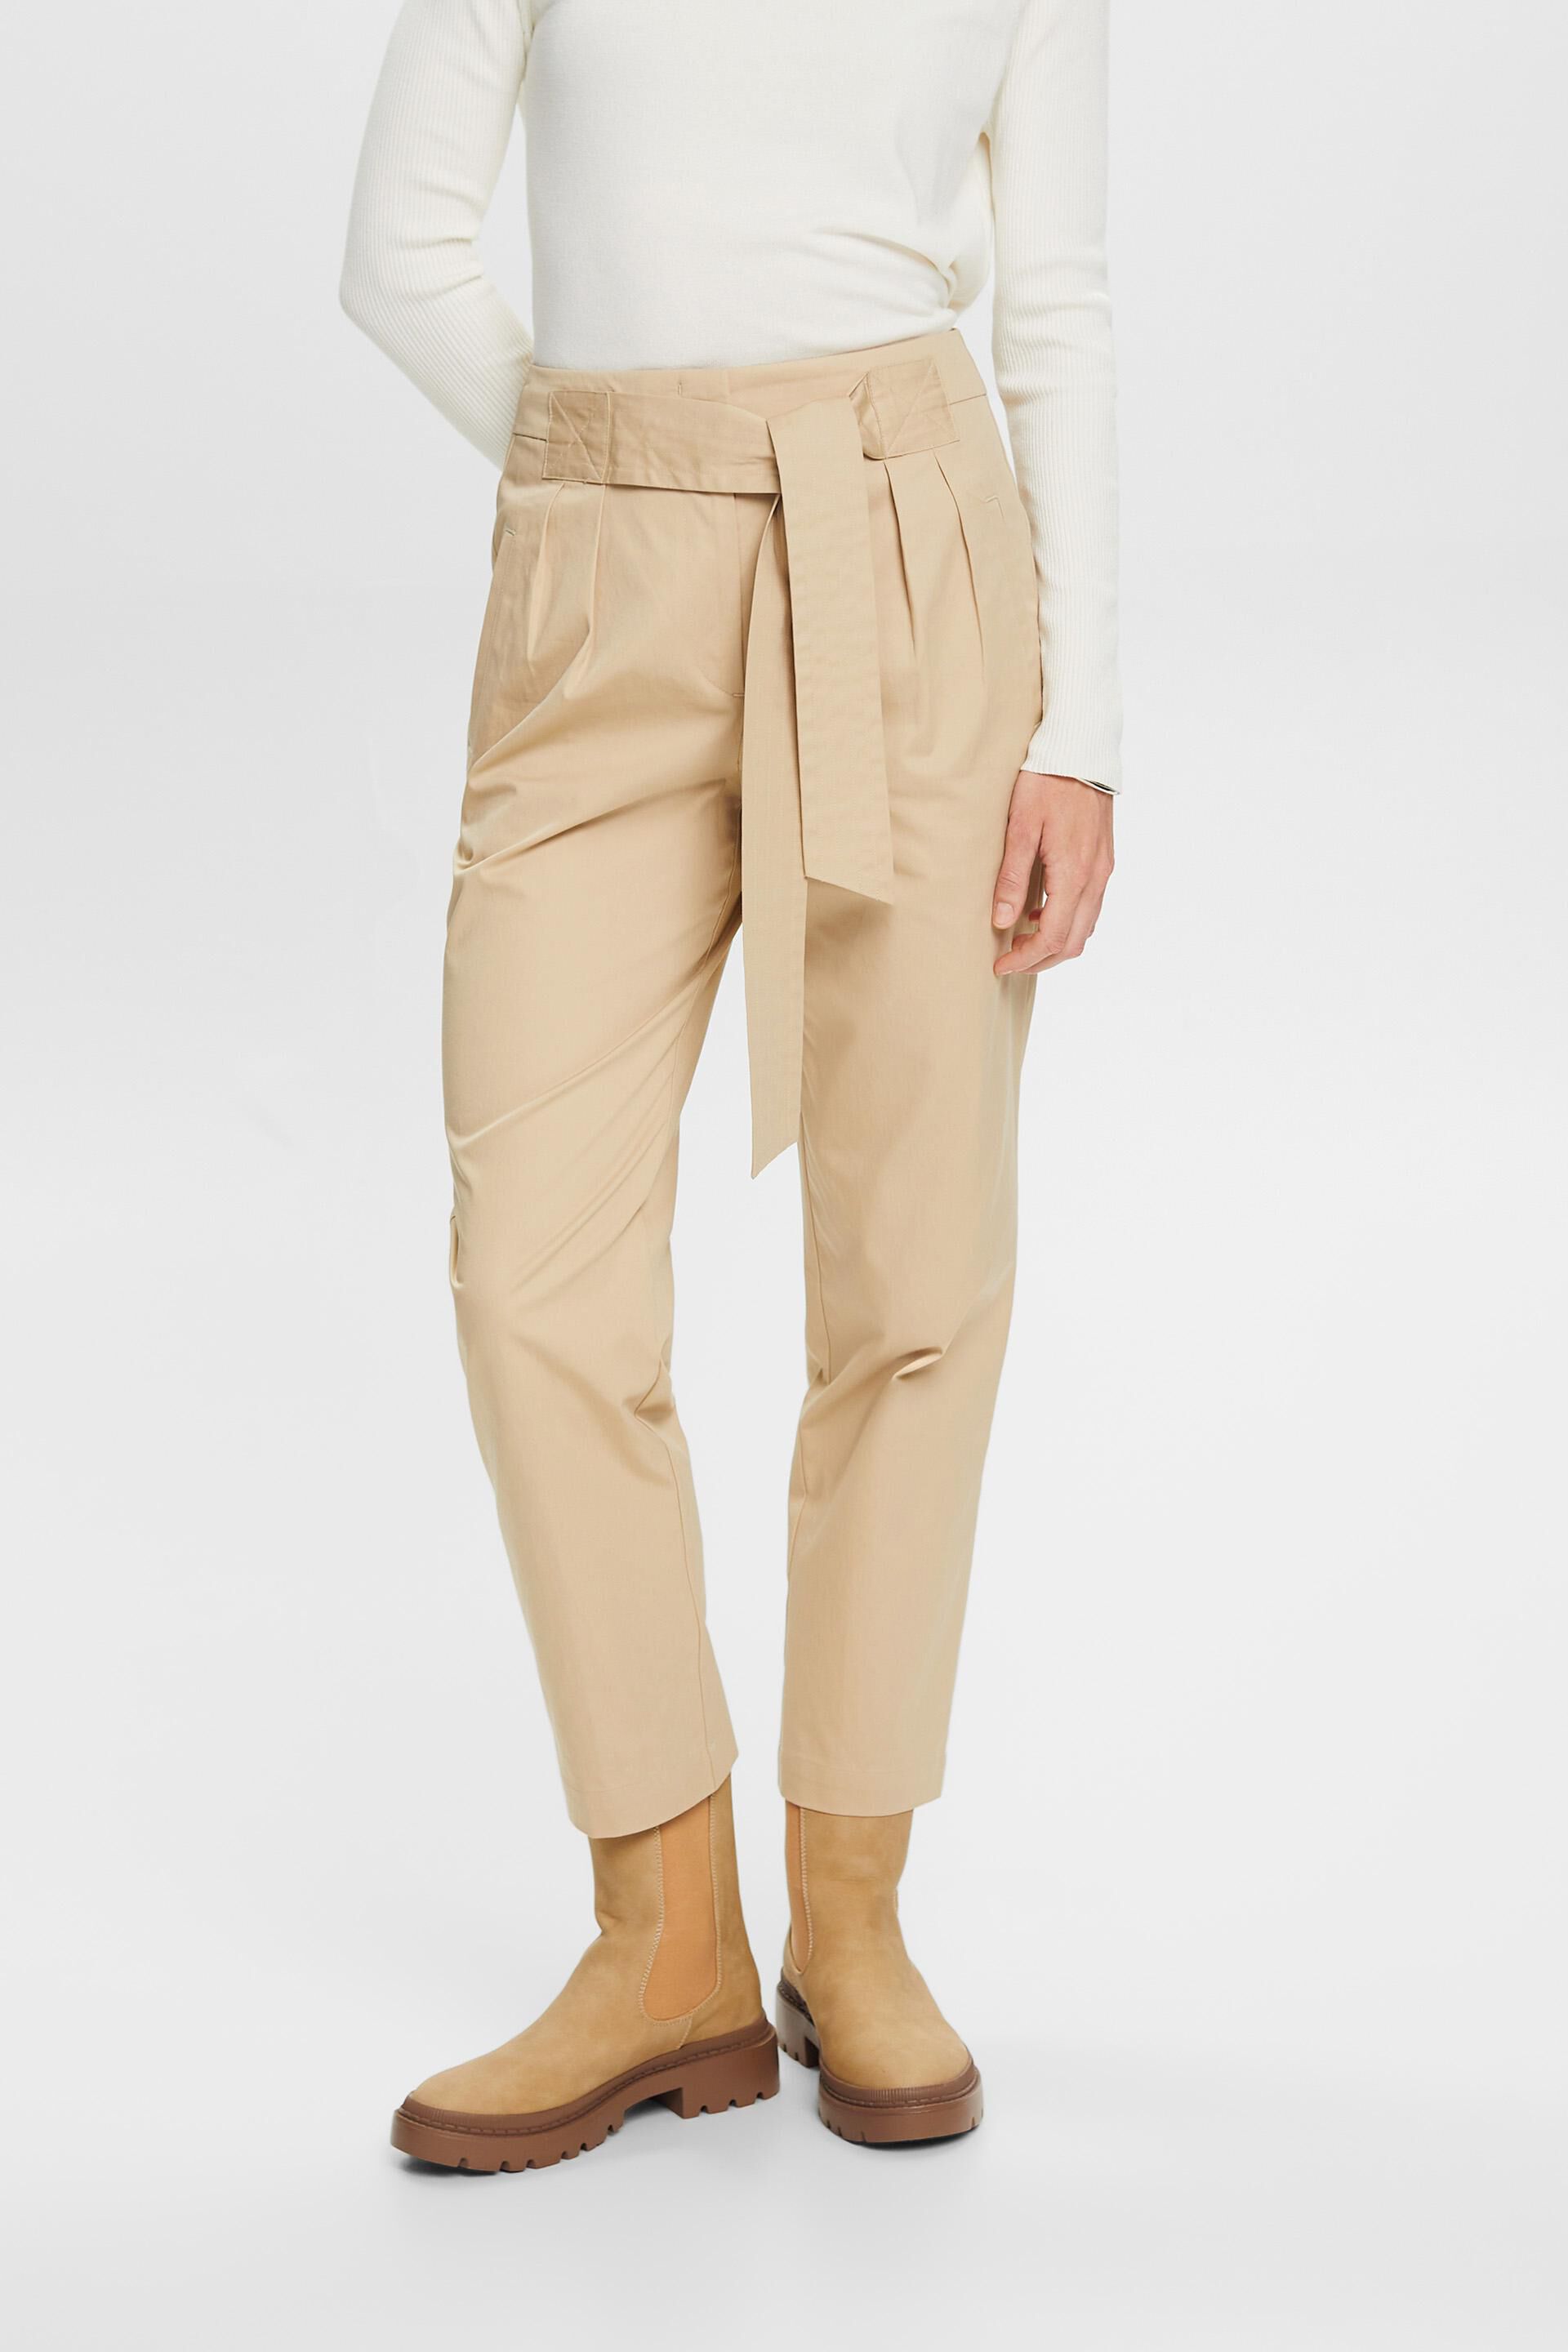 Esprit Damen Chino trousers with a fixed tie belt, 100% cotton